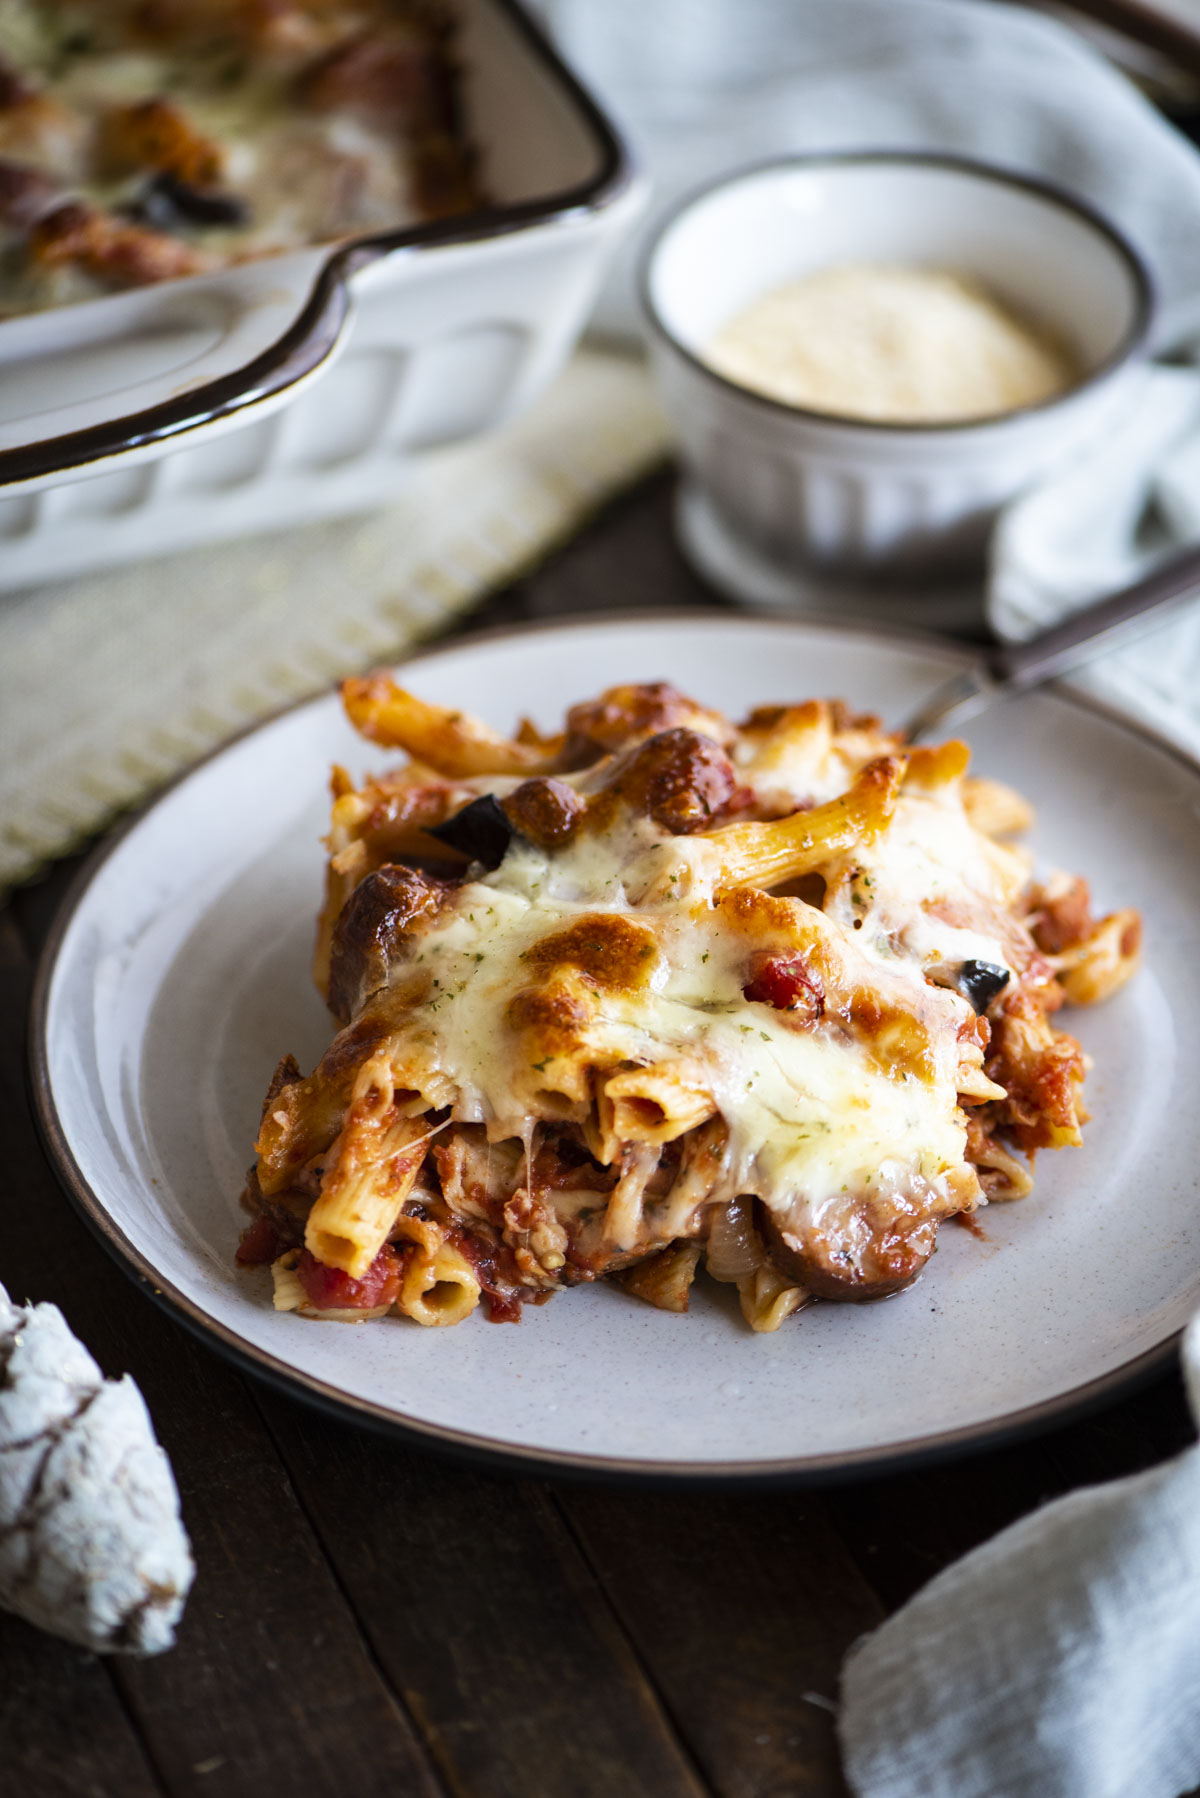 Single serving of baked ziti on plate